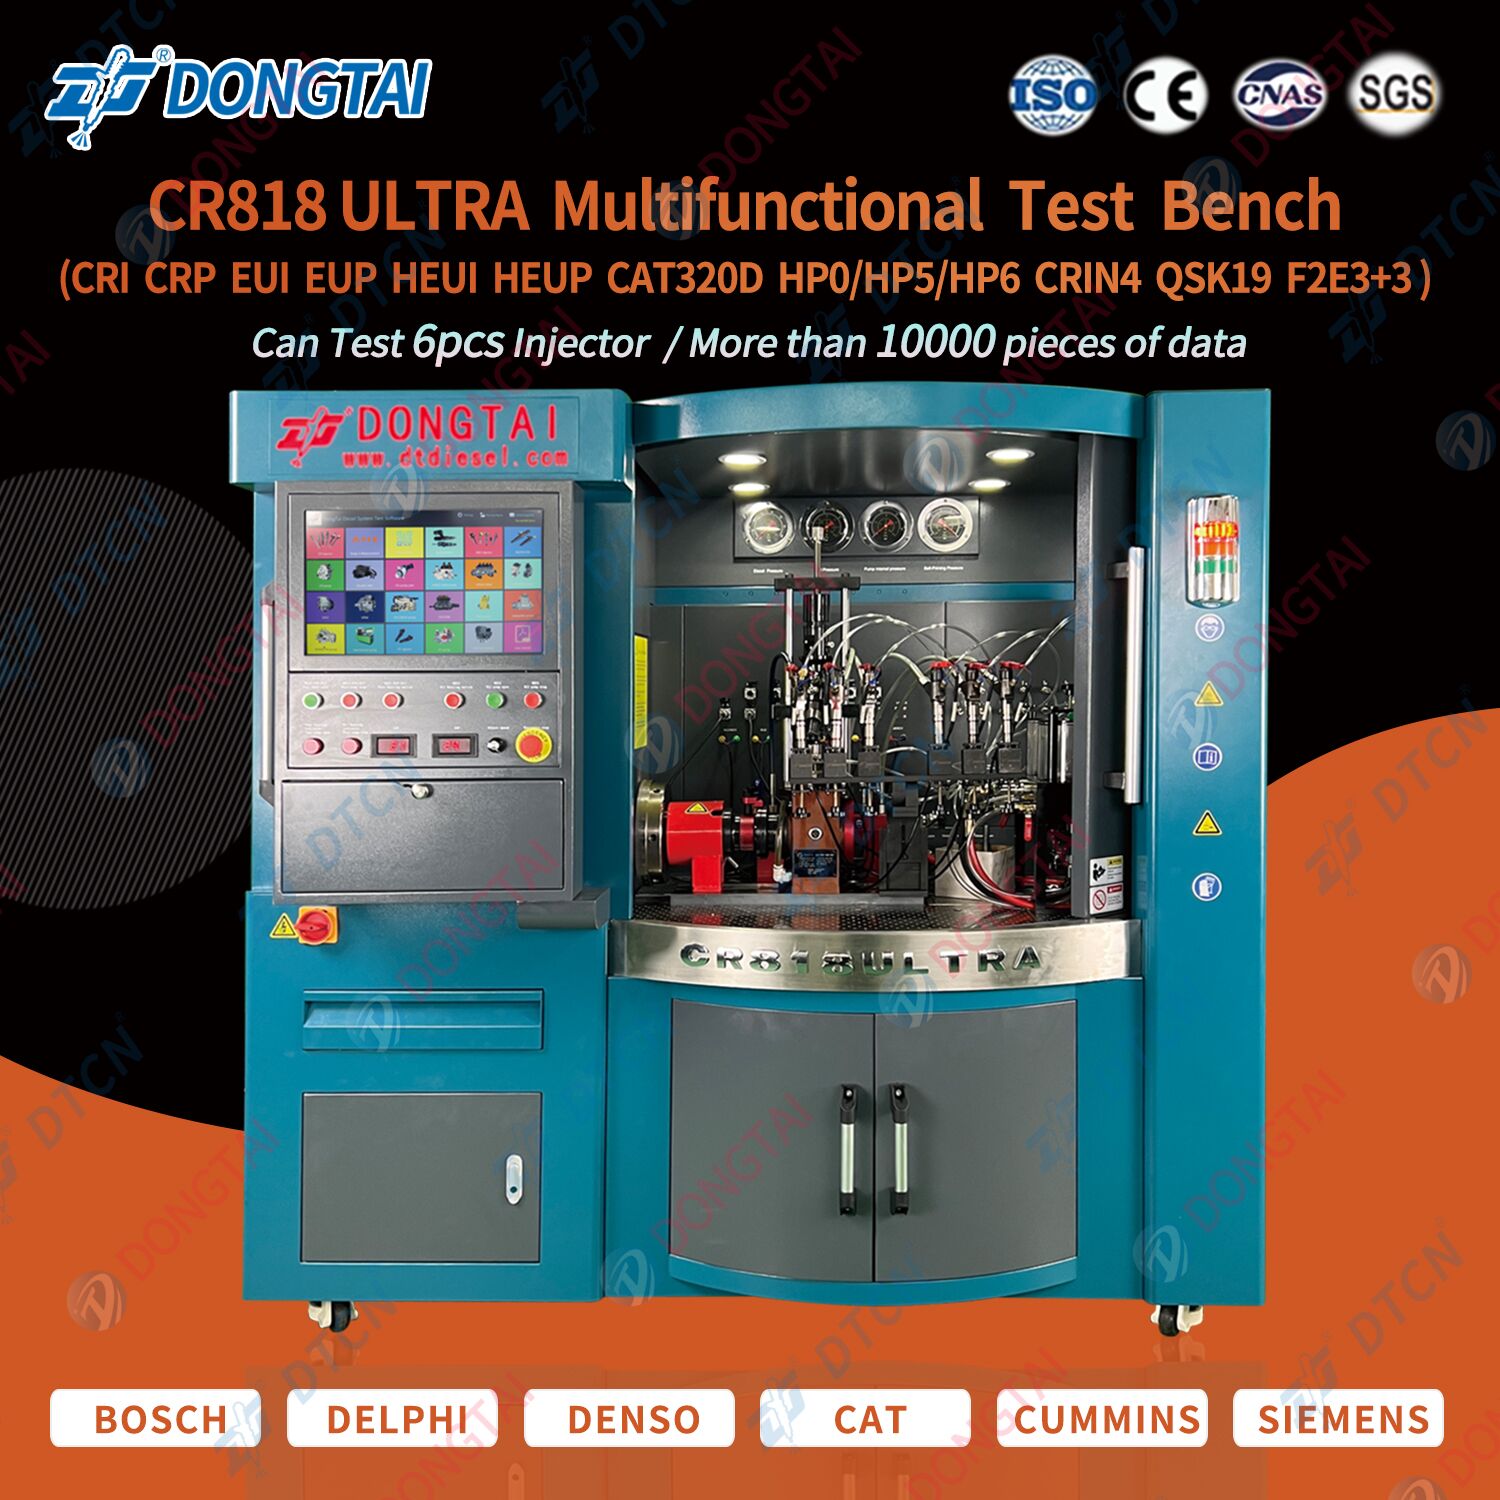 CR818ULTRA Multifunctional Test Bench Featured Image